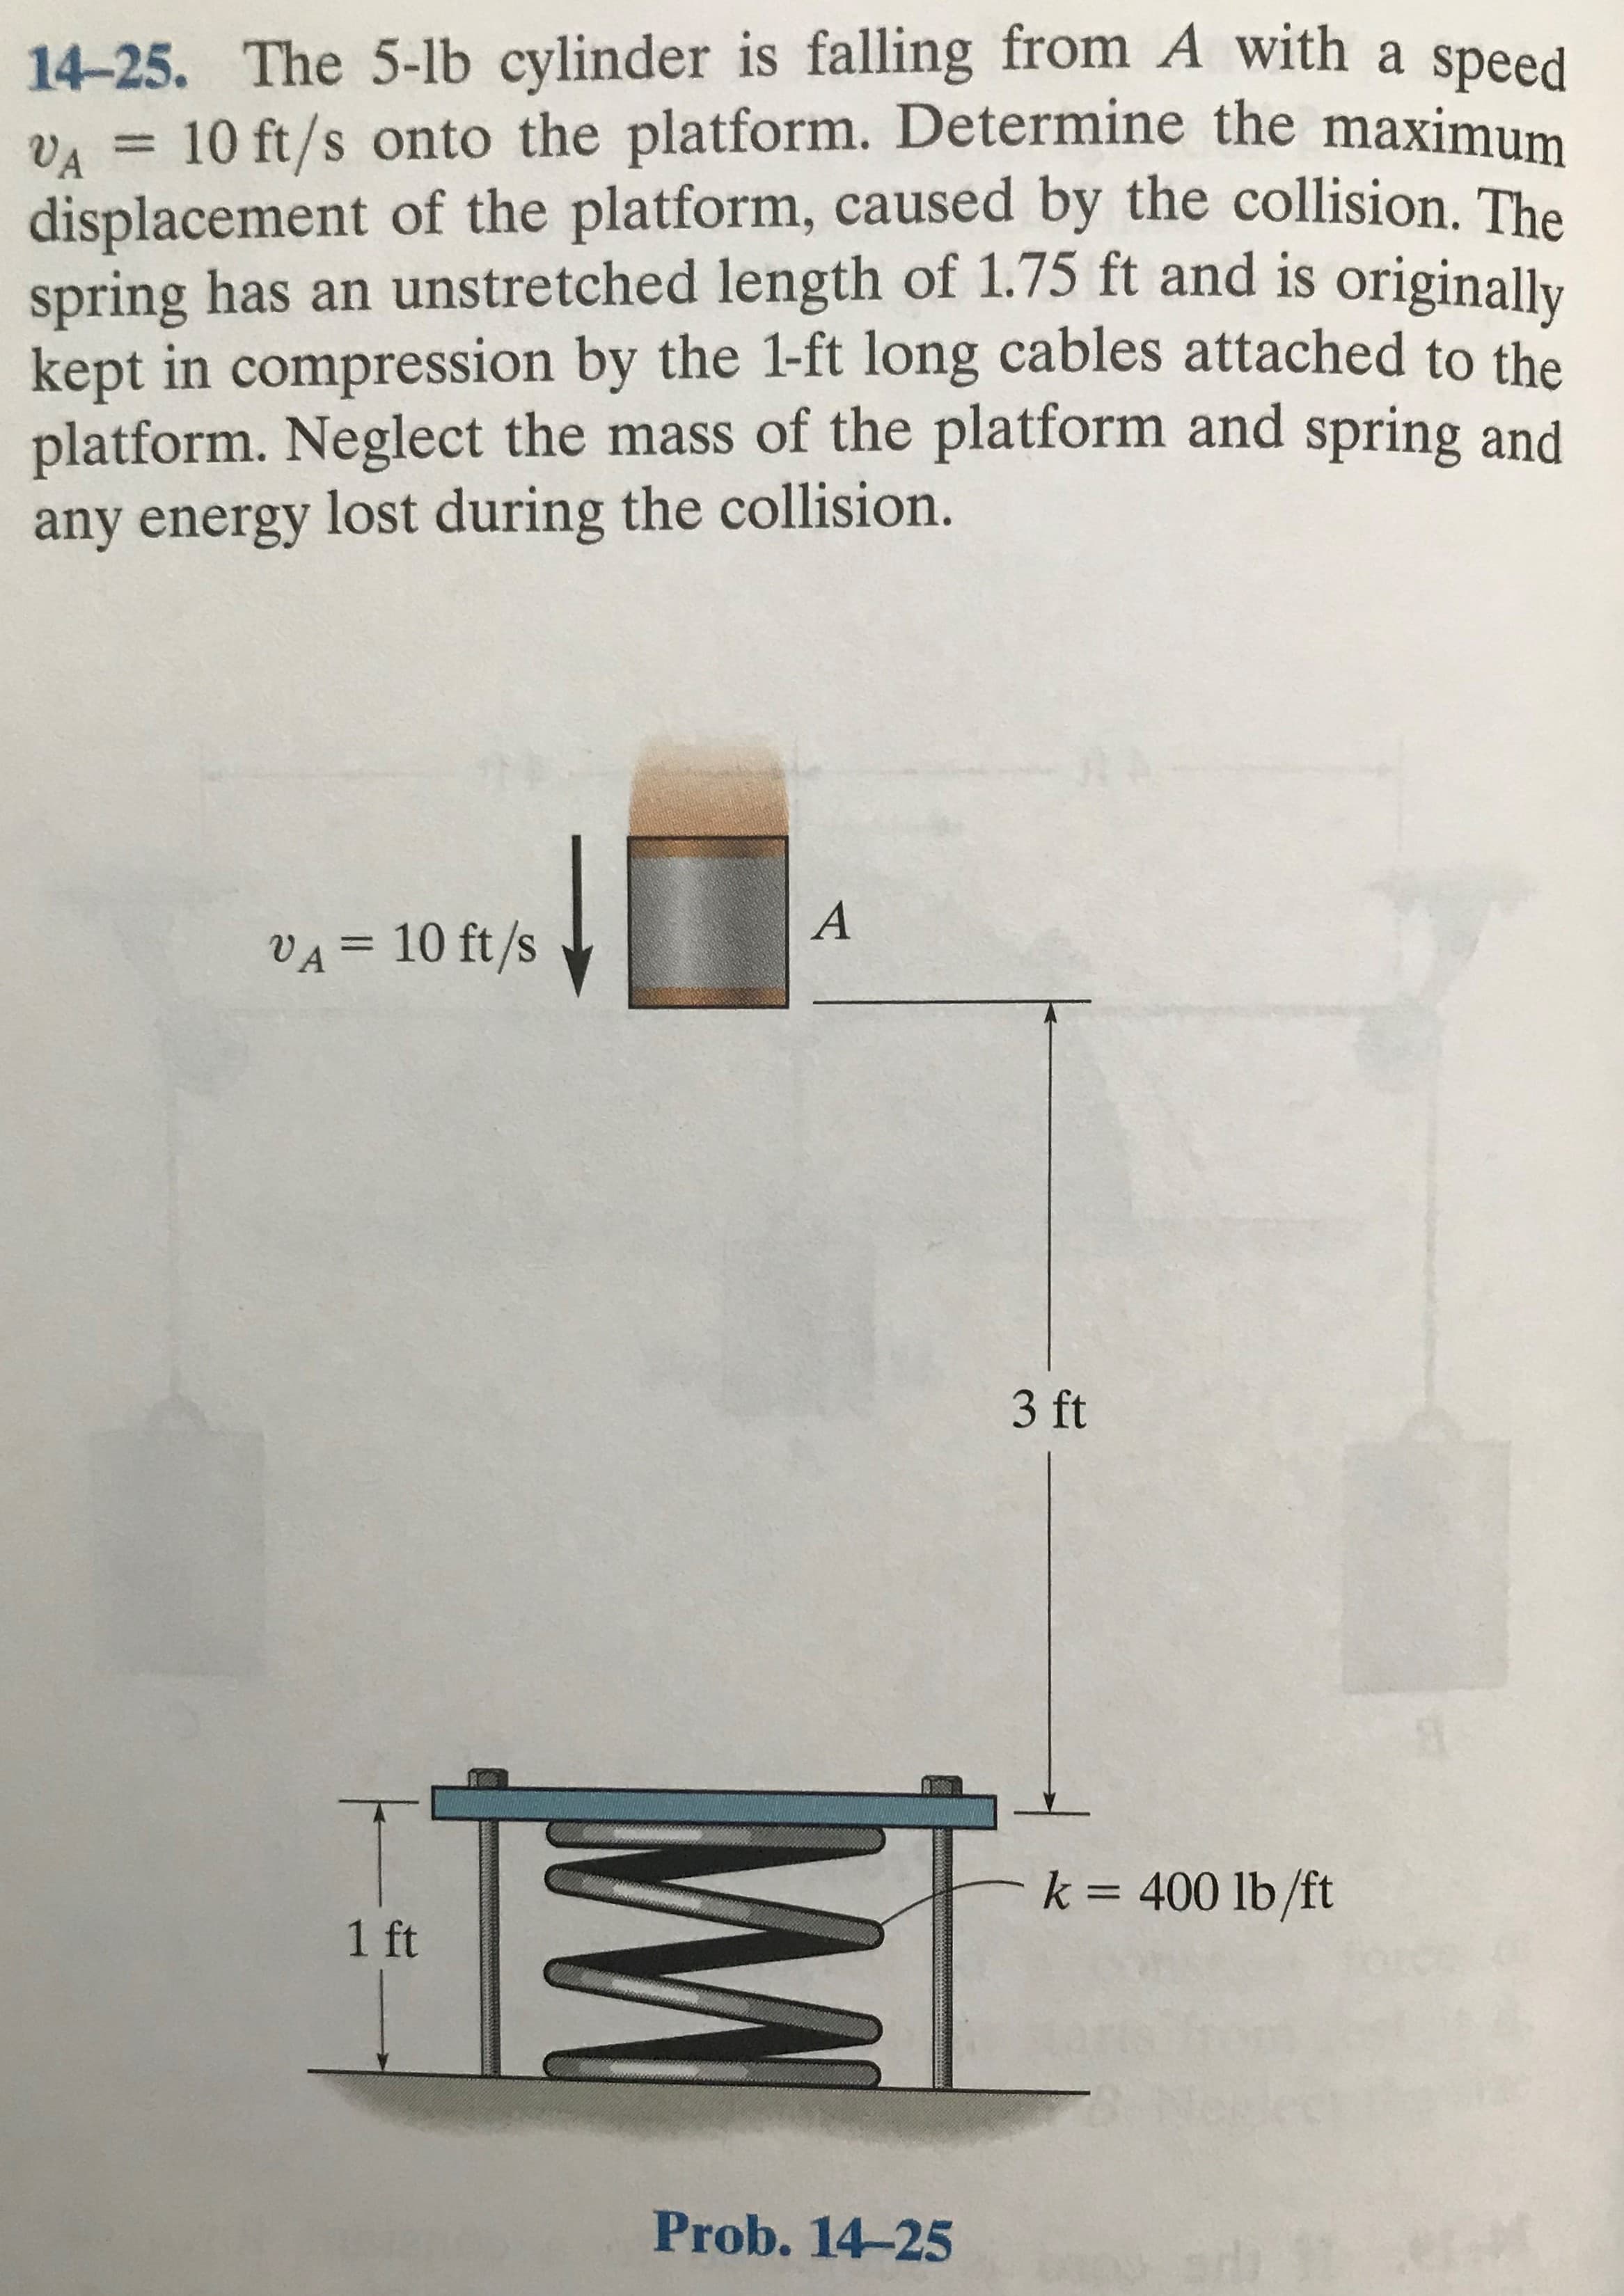 14-25. The 5-lb cylinder is falling from A with a speed
VA = 10 ft/s onto the platform. Determine the maximum
displacement of the platform, caused by the collision. The
spring has an unstretched length of 1.75 ft and is originallv
kept in compression by the 1-ft long cables attached to the
platform. Neglect the mass of the platform and spring and
any energy lost during the collision.
%3D
VA = 10 ft/s
3 ft
k = 400 lb/ft
1 ft
Prob. 14-25
